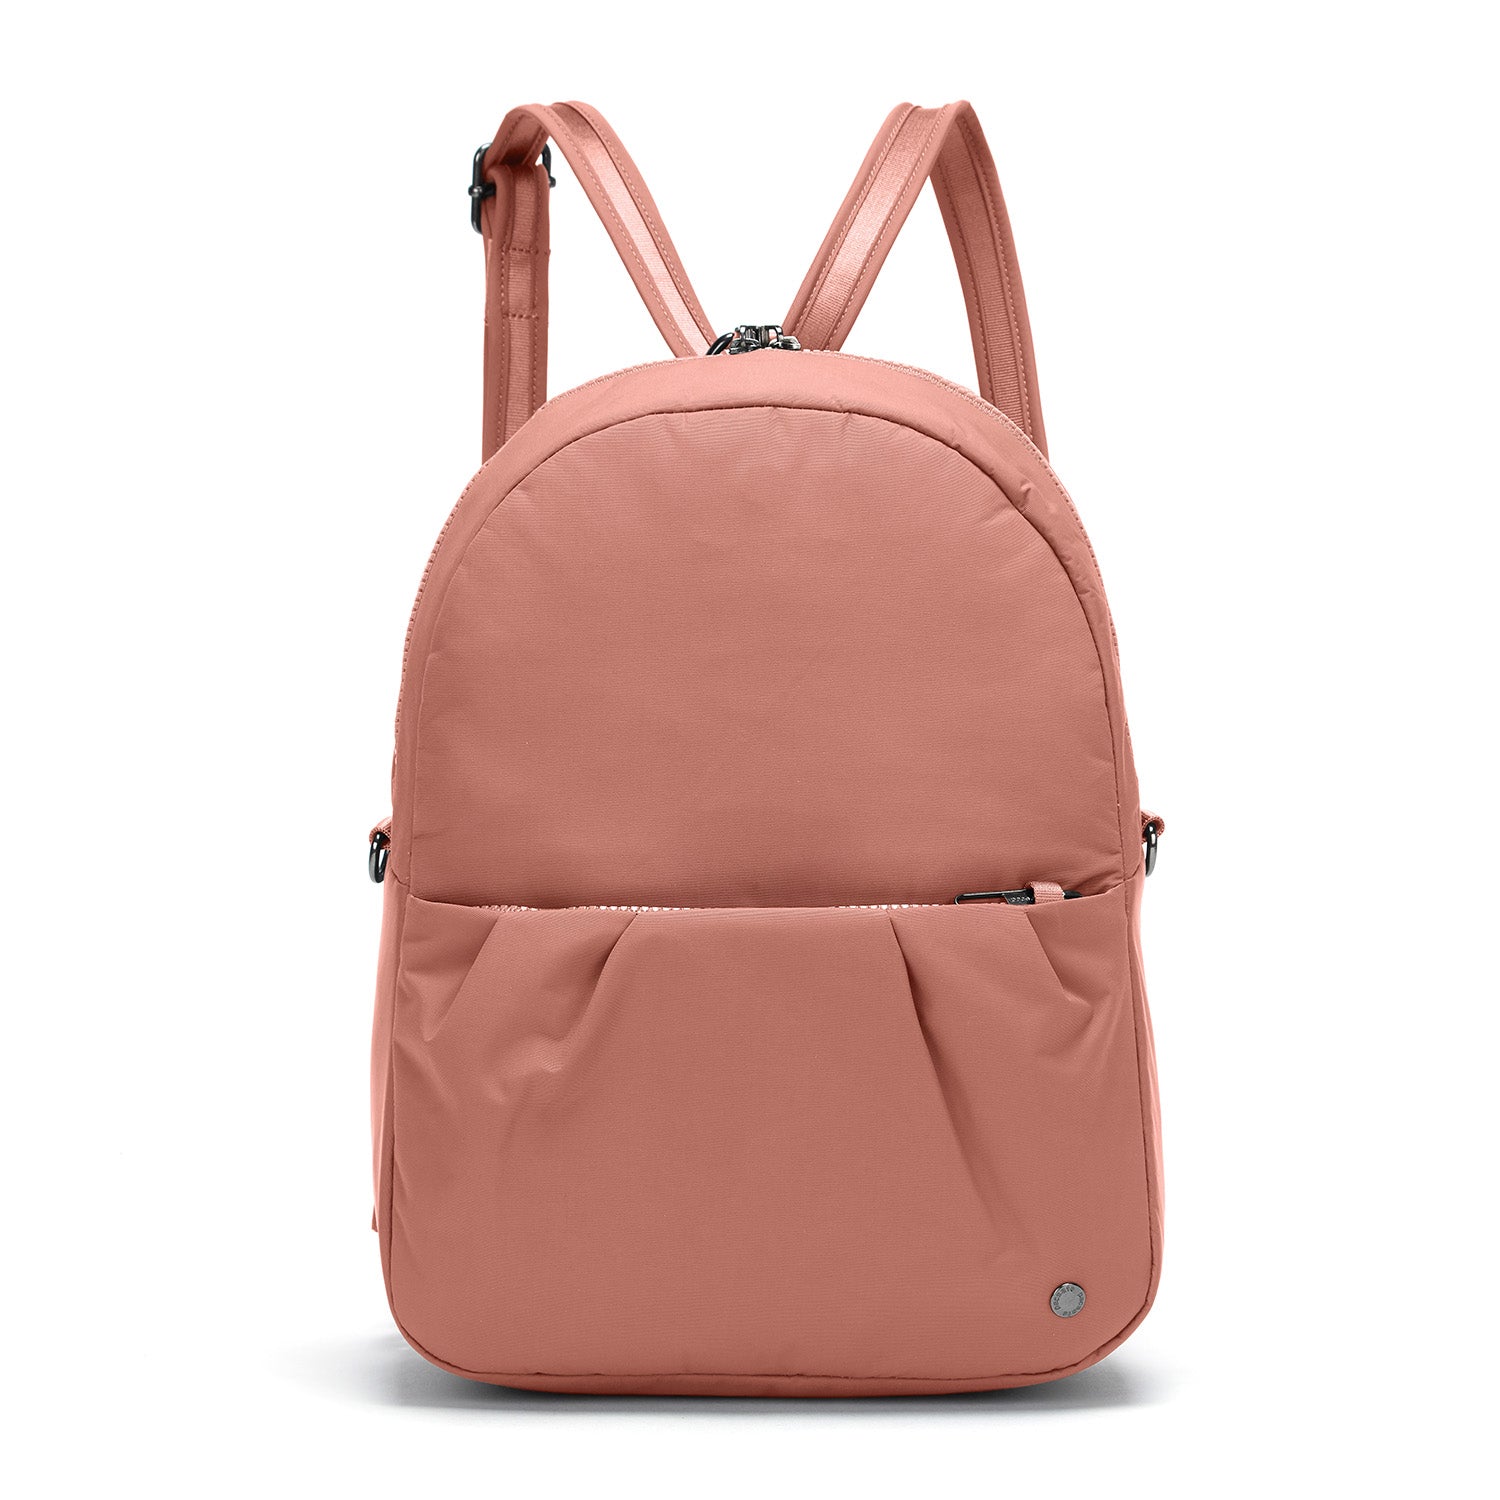 Pacsafe - CX Convertible Backpack - Rose - 0